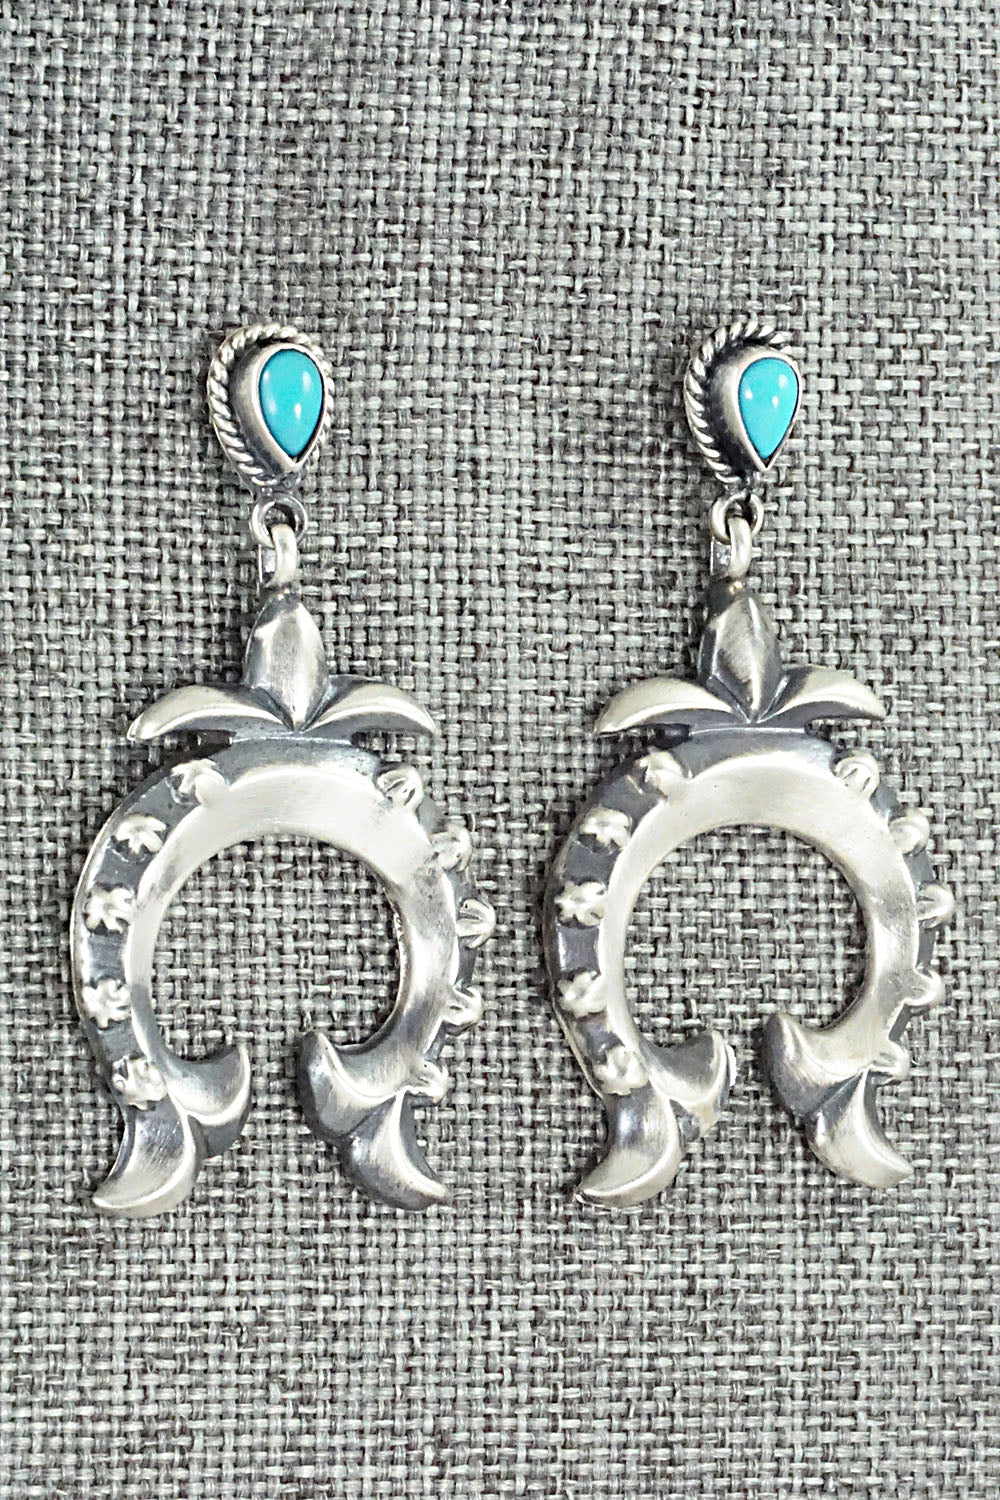 Turquoise & Sterling Silver Earrings - Lee Shorty